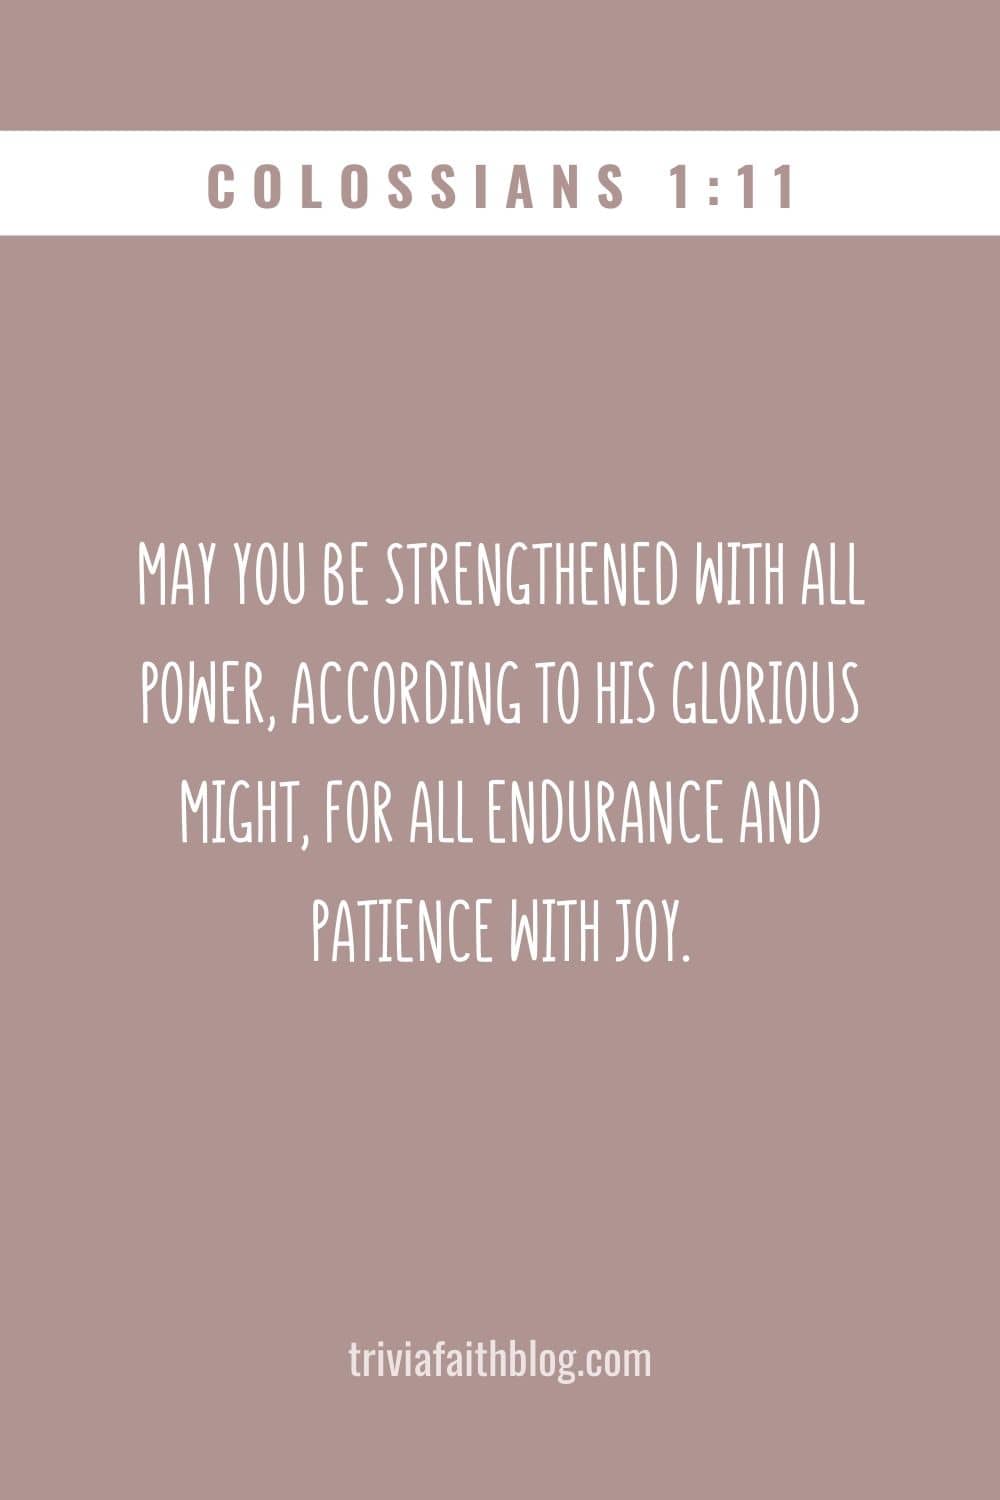 May you be strengthened with all power, according to his glorious might, for all endurance and patience with joy